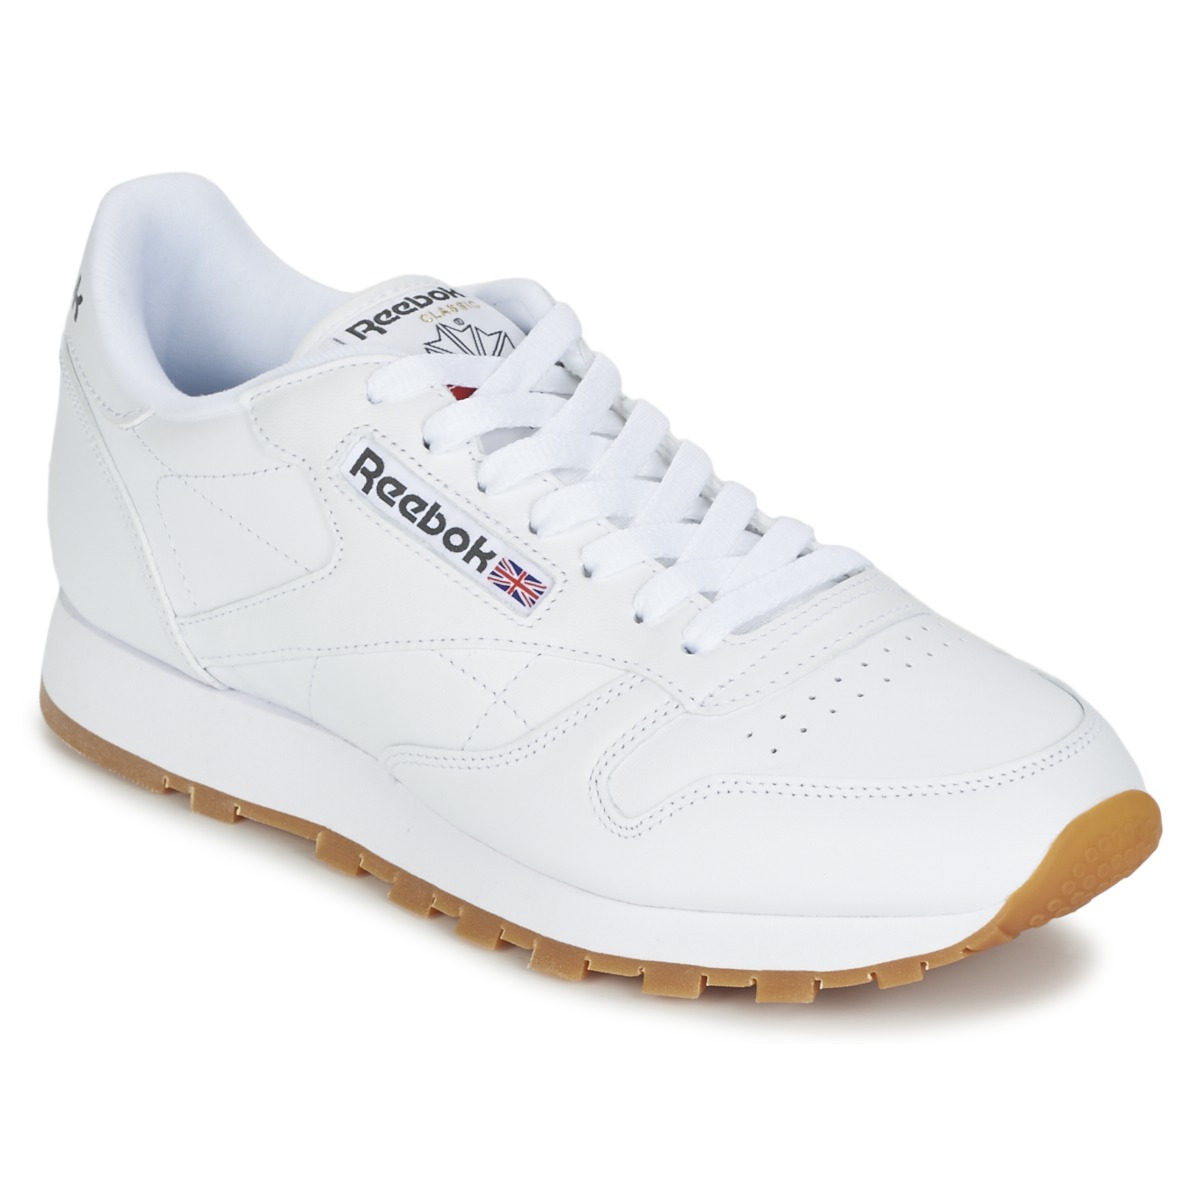 Adelaida Poderoso Megalópolis Reebok Classic CLASSIC LEATHER White - Free delivery | Spartoo NET ! -  Shoes Low top trainers USD/$79.20